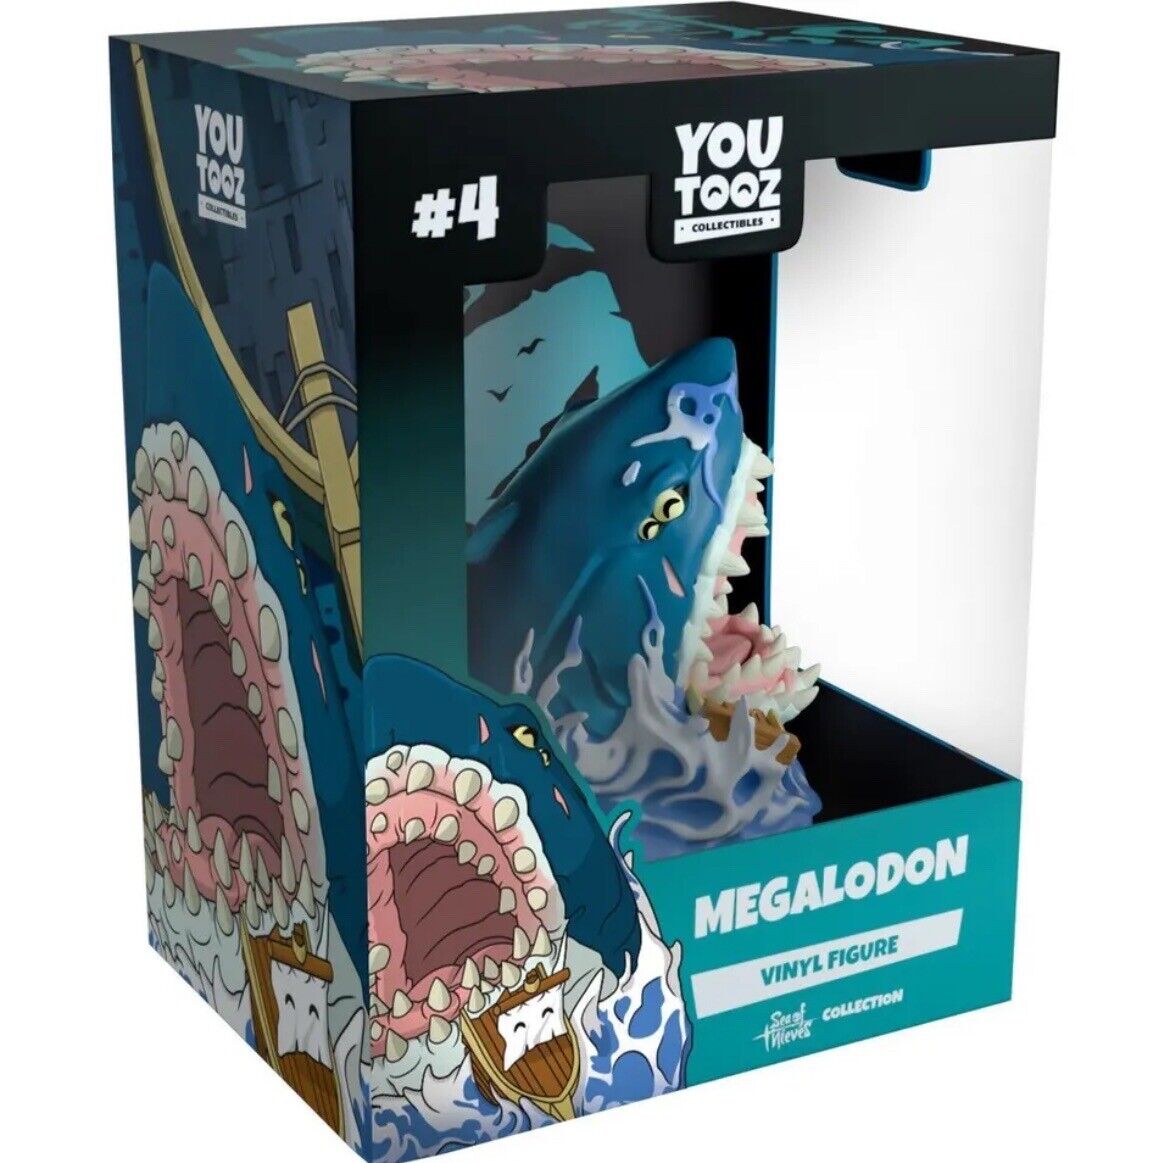 Youtooz * Sea of Thieves Collection * Megalodon * Vinyl Figure #4 * Shark *NEW